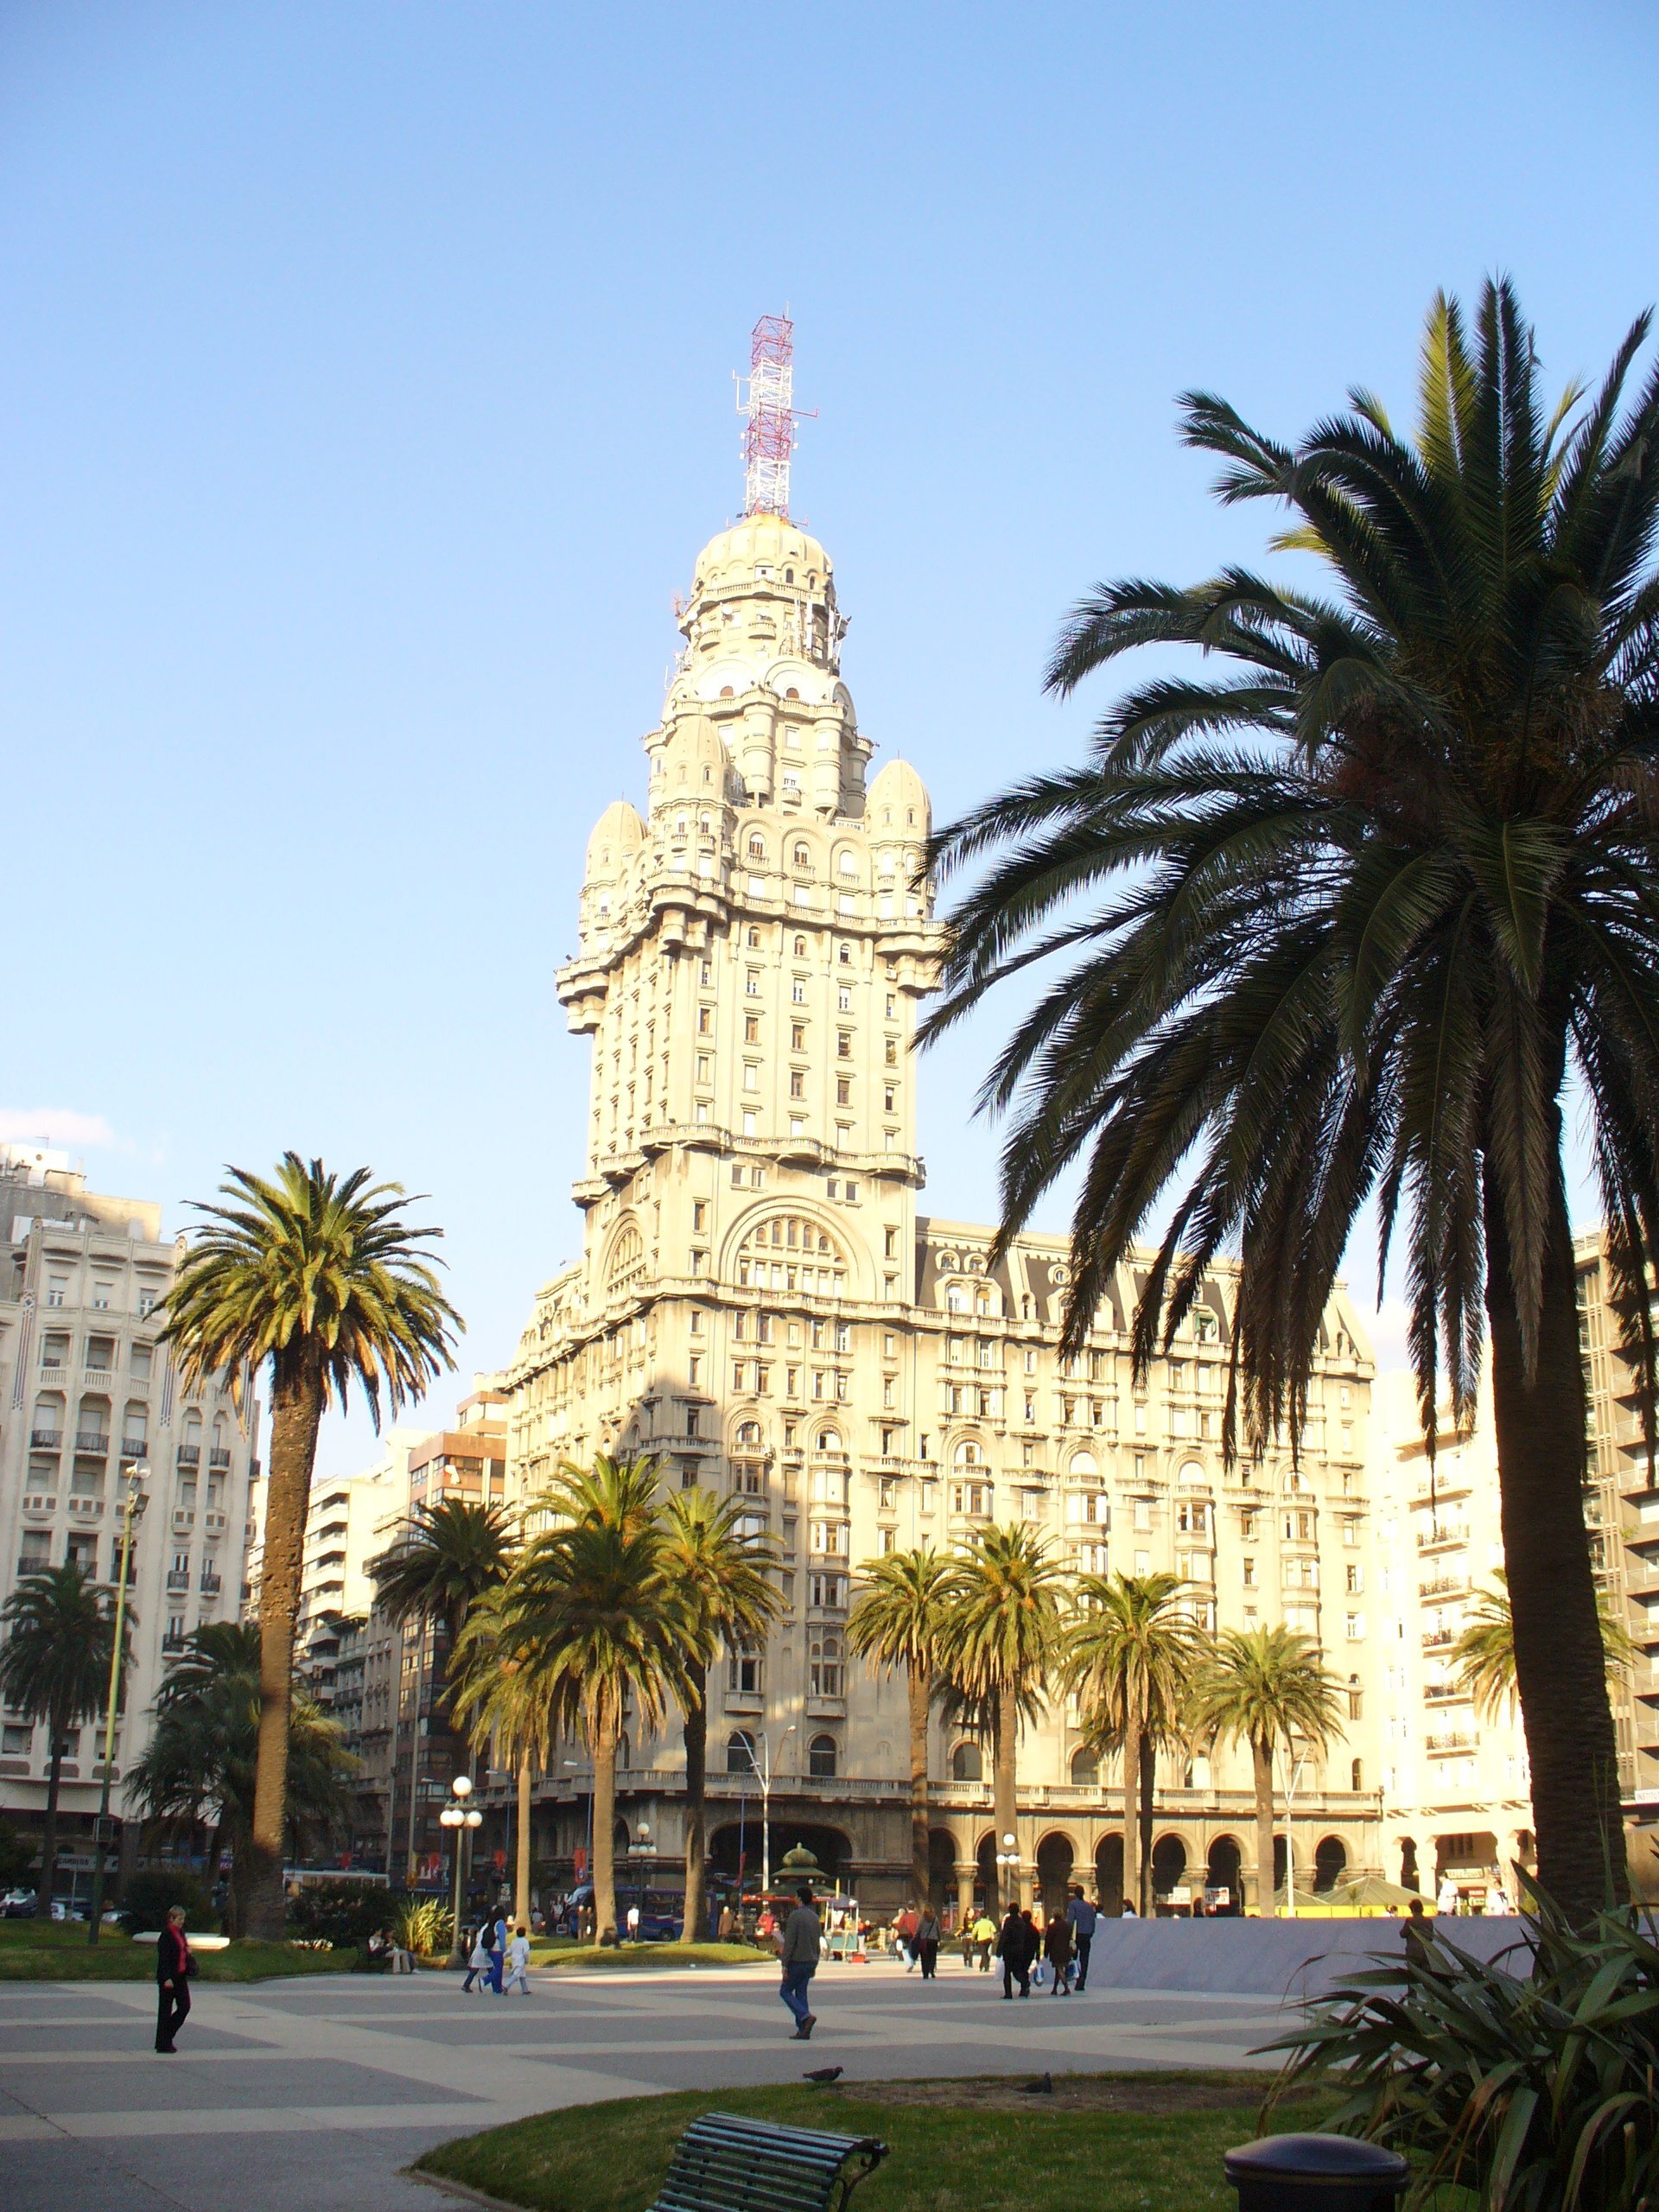 Palacio Salvo was once the tallest building in South America.